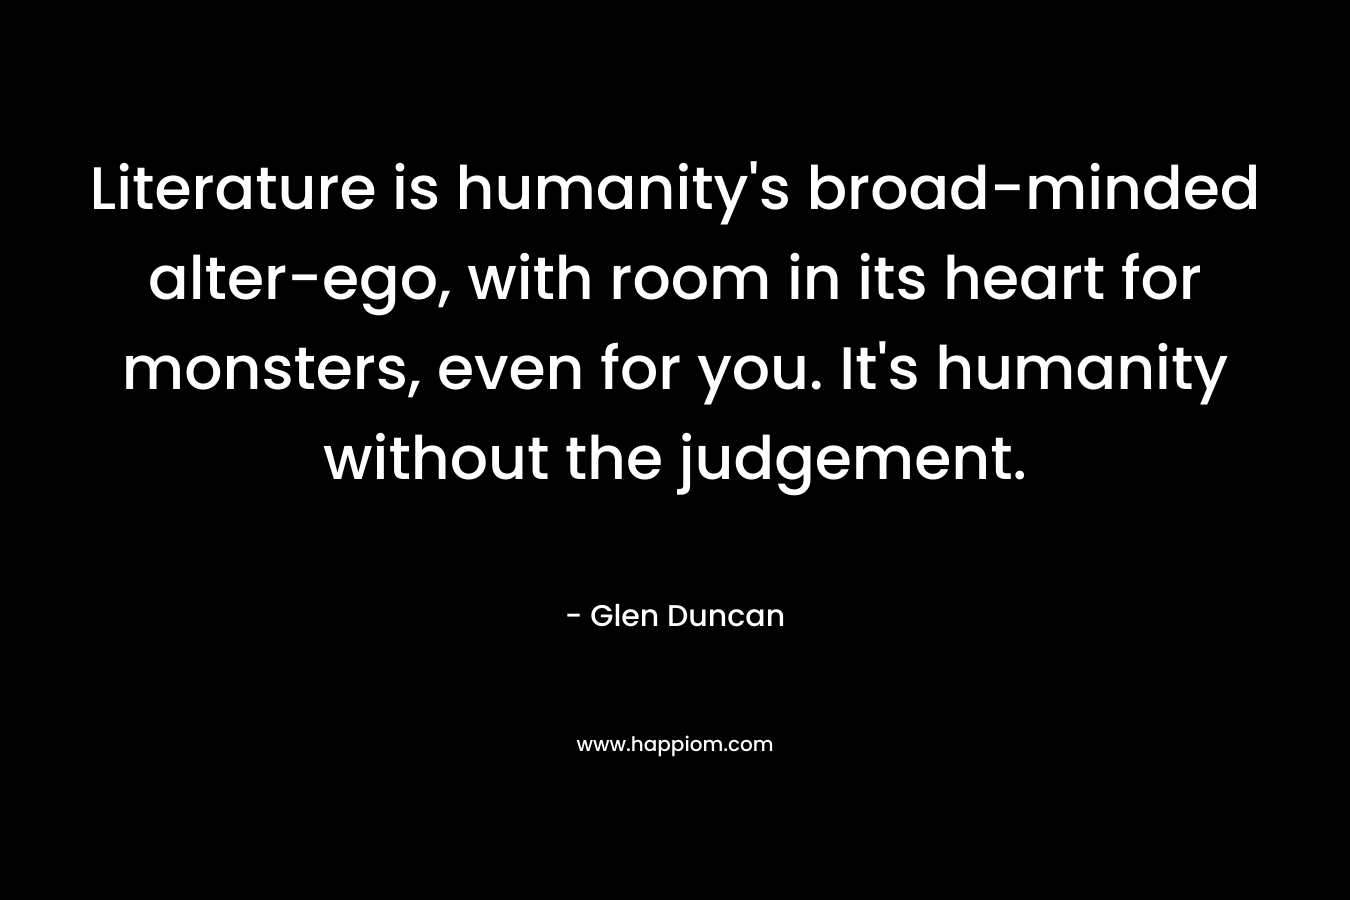 Literature is humanity’s broad-minded alter-ego, with room in its heart for monsters, even for you. It’s humanity without the judgement. – Glen Duncan